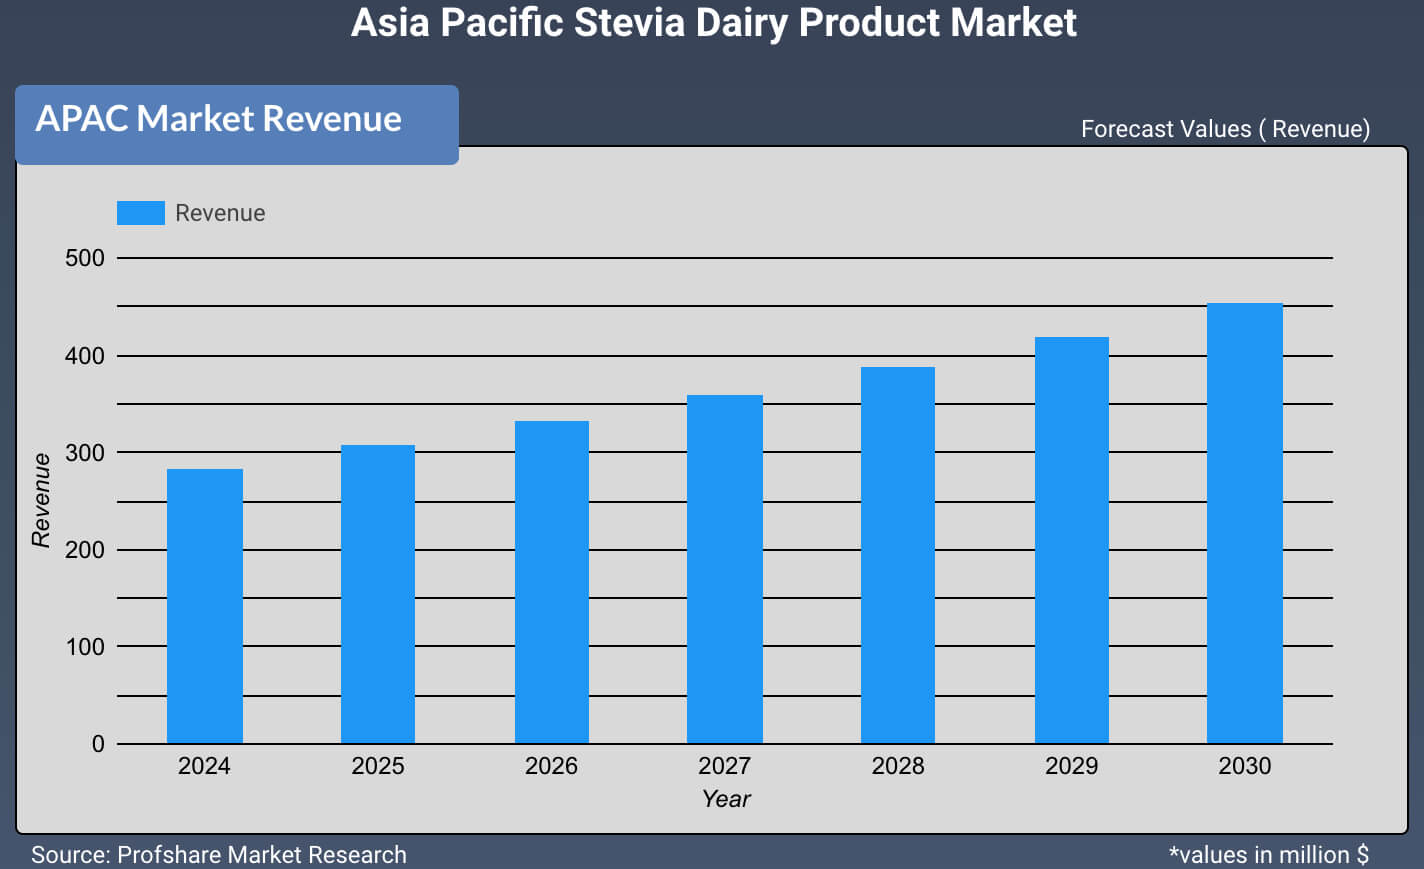 Asia Pacific Stevia Dairy Product Market